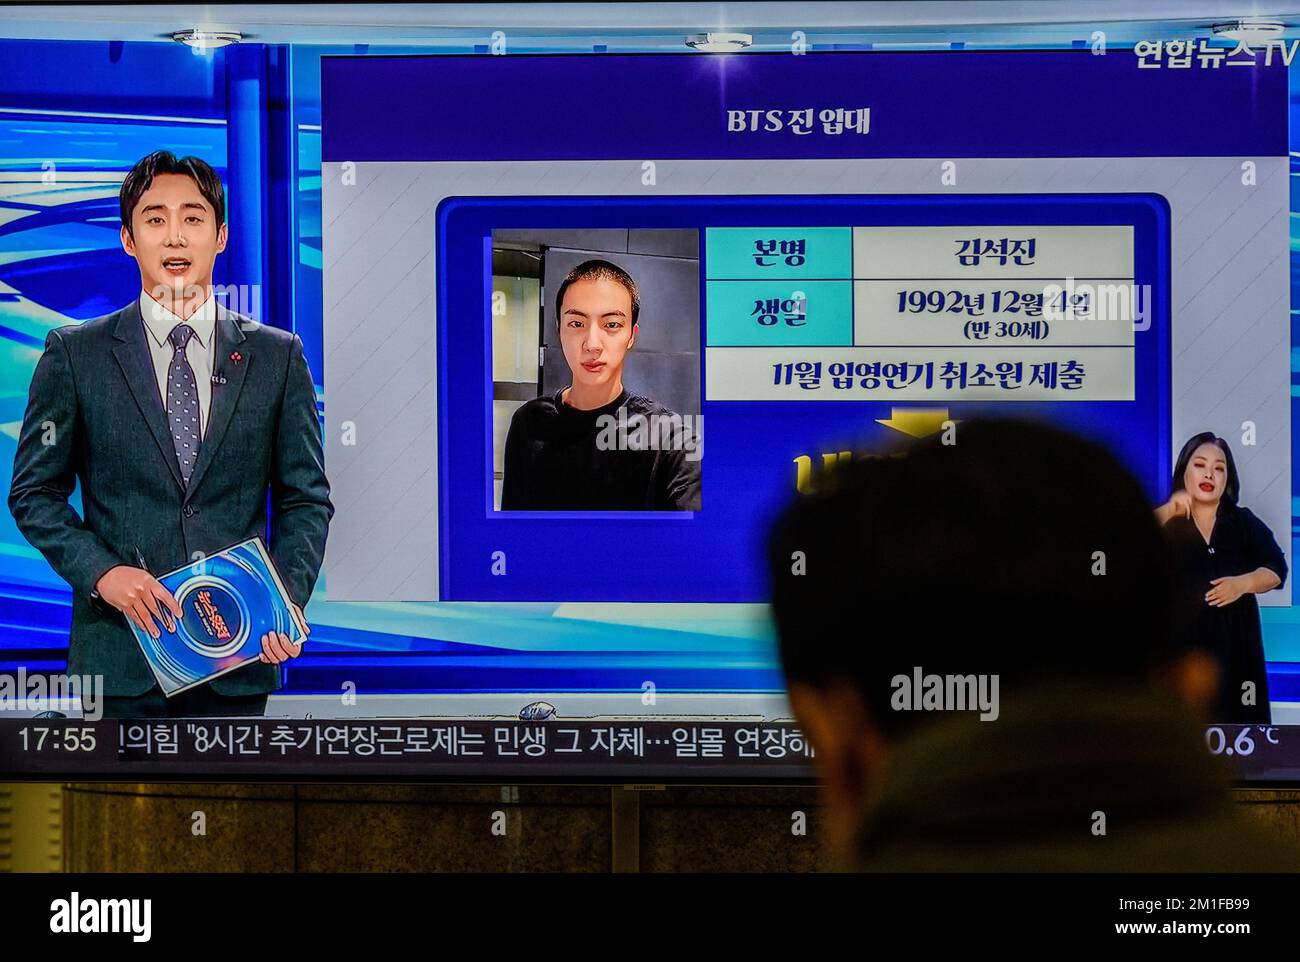 Jin, a member of K-pop group BTS, is showing a picture of his haircut and news of his enlistment in the South Korean army ahead of his enlistment in the military on TV at Yongsan Railway Station in Seoul. Jin, the member of the K-pop group BTS to serve in the military, has released a photo of himself with a military haircut ahead of his enlistment. The 30-year-old vocalist will enter a boot camp of a front-line Army 5 division in Yeoncheon, 60 kilometers north of Seoul, on 13 December, according to military and industry sources. After undergoing a five-week basic training program, Jin will be Stock Photo